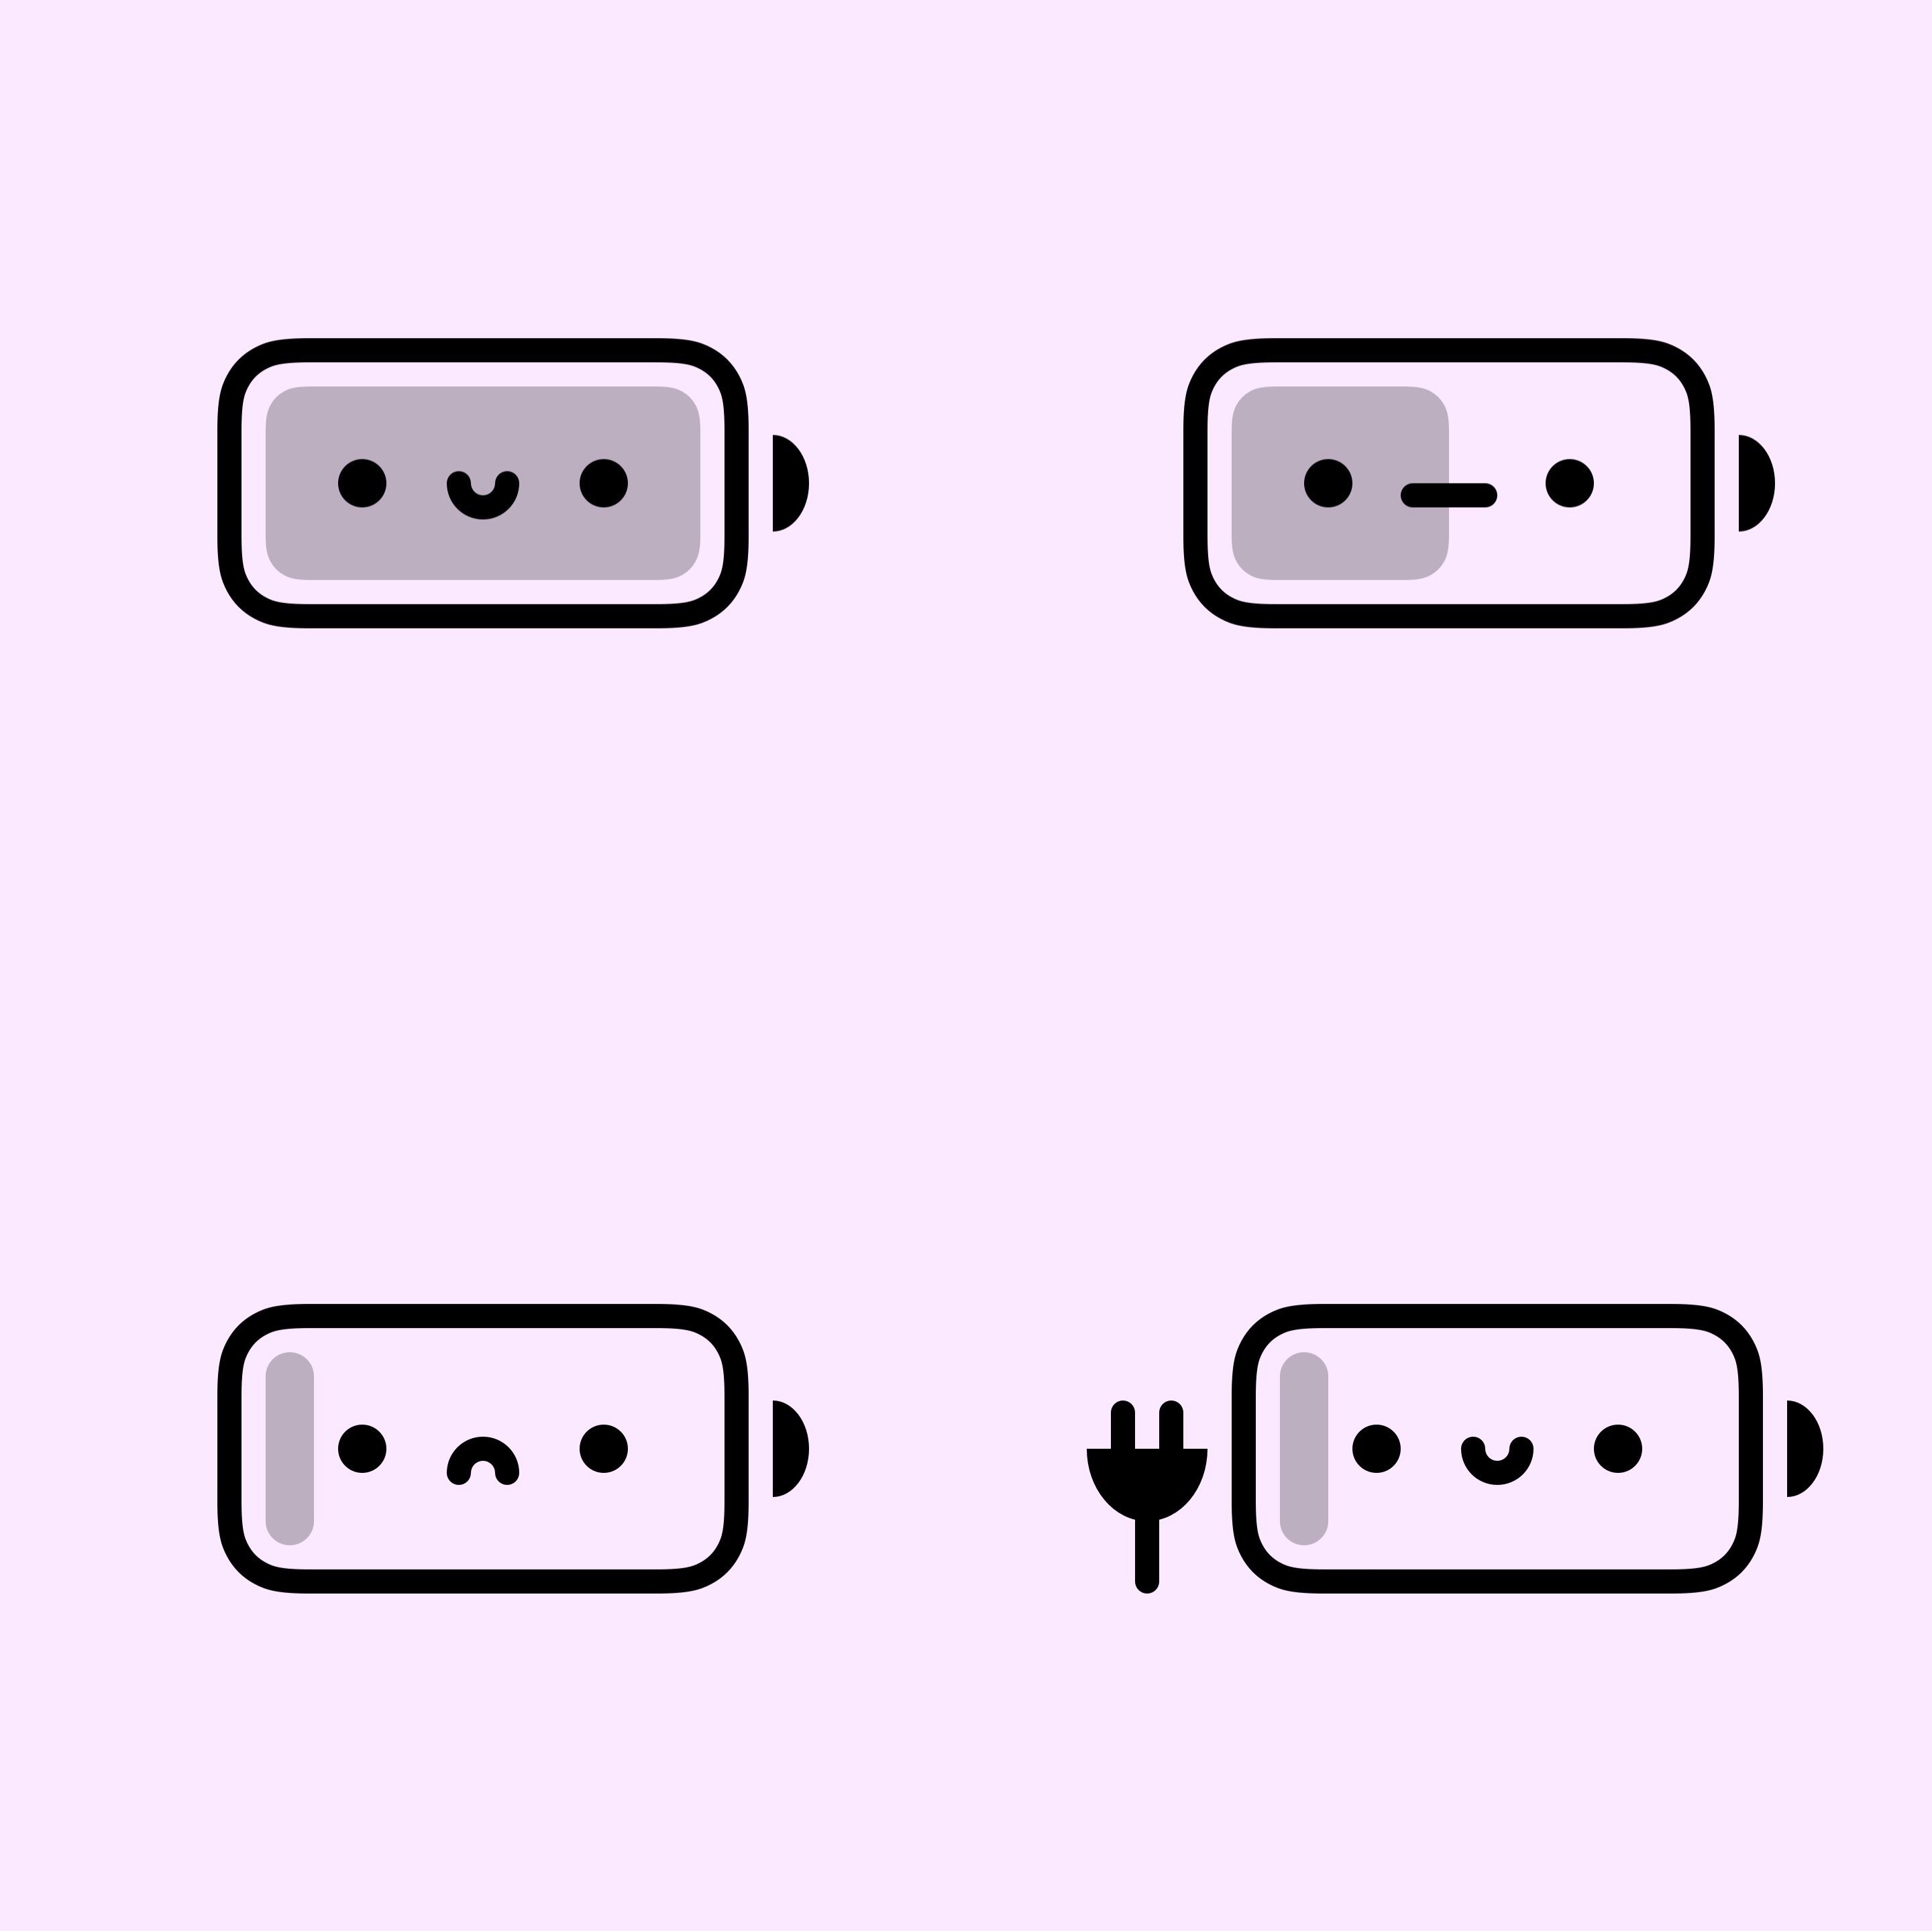 battery buddy download